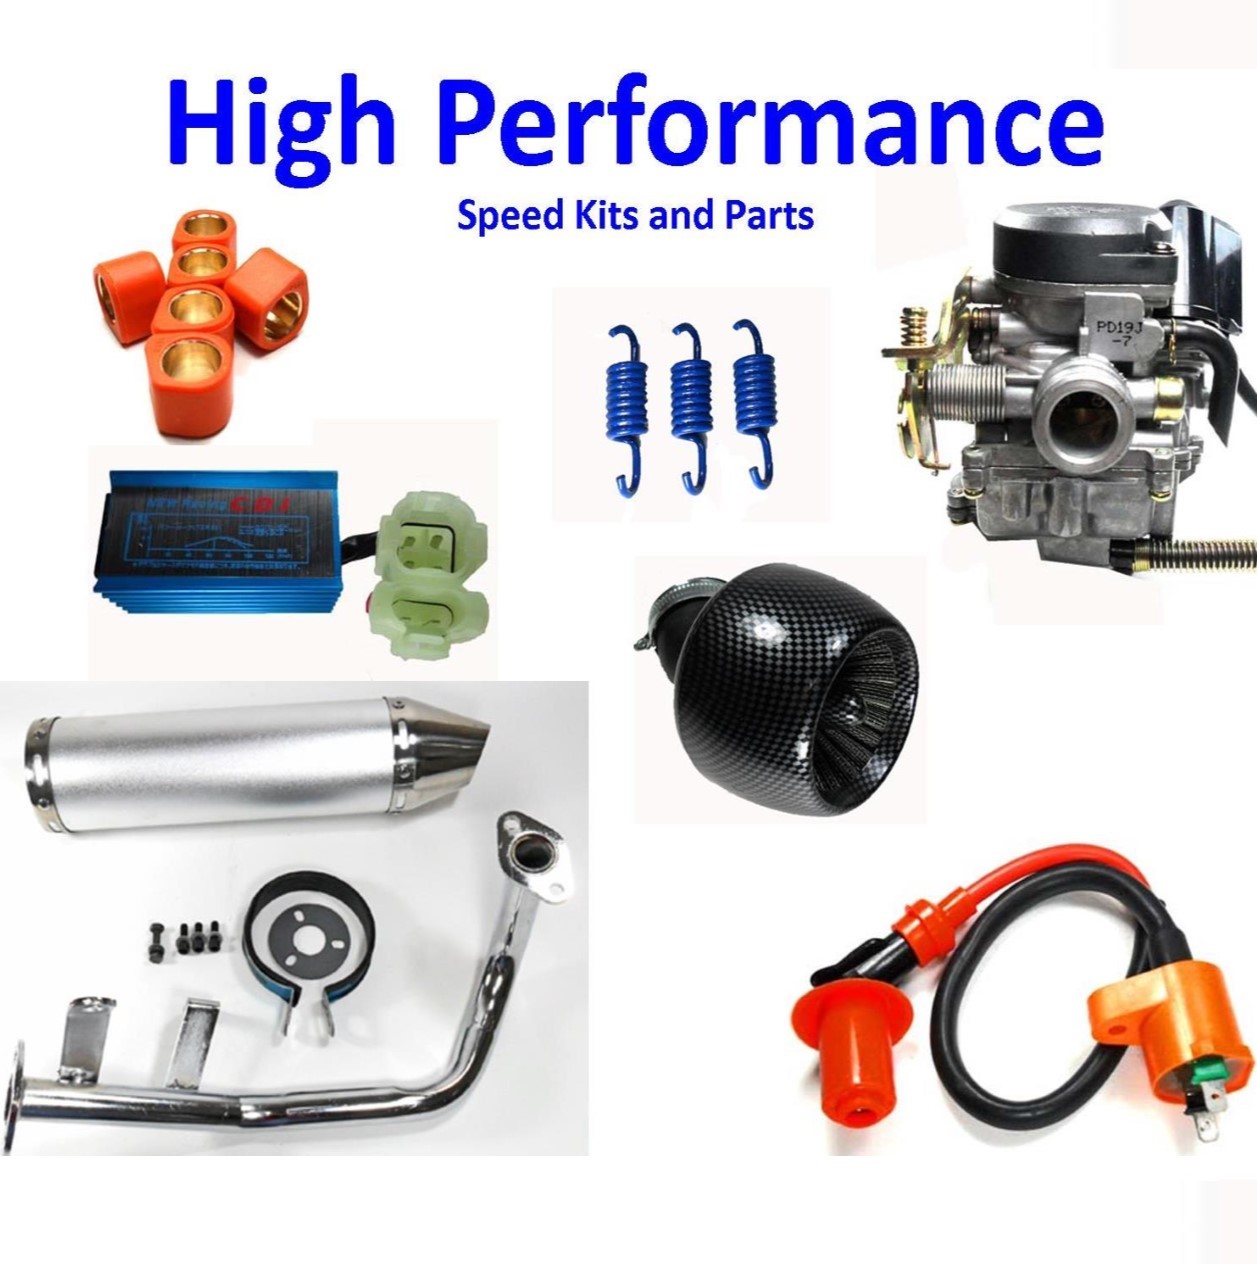 High Performance Parts 49 - 100cc GY6-QMB Scooters